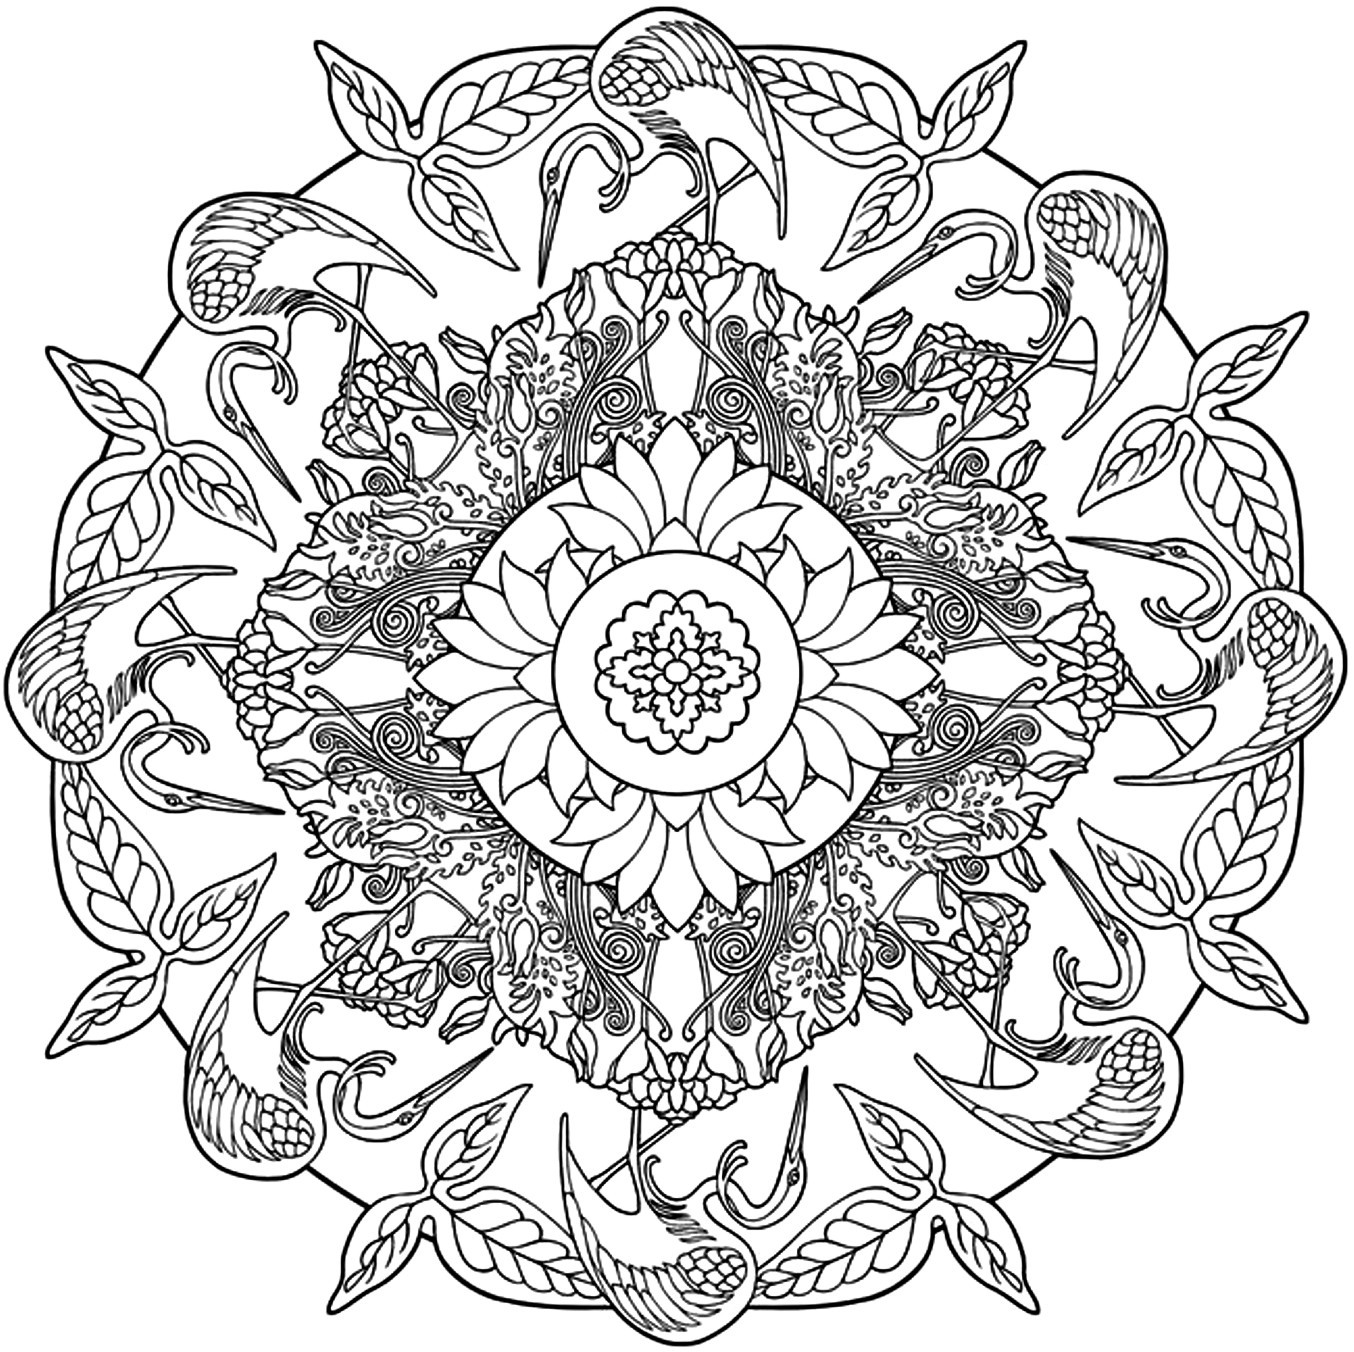 Mandala Coloring Book Pages
 Free Printable Adult Coloring Pages